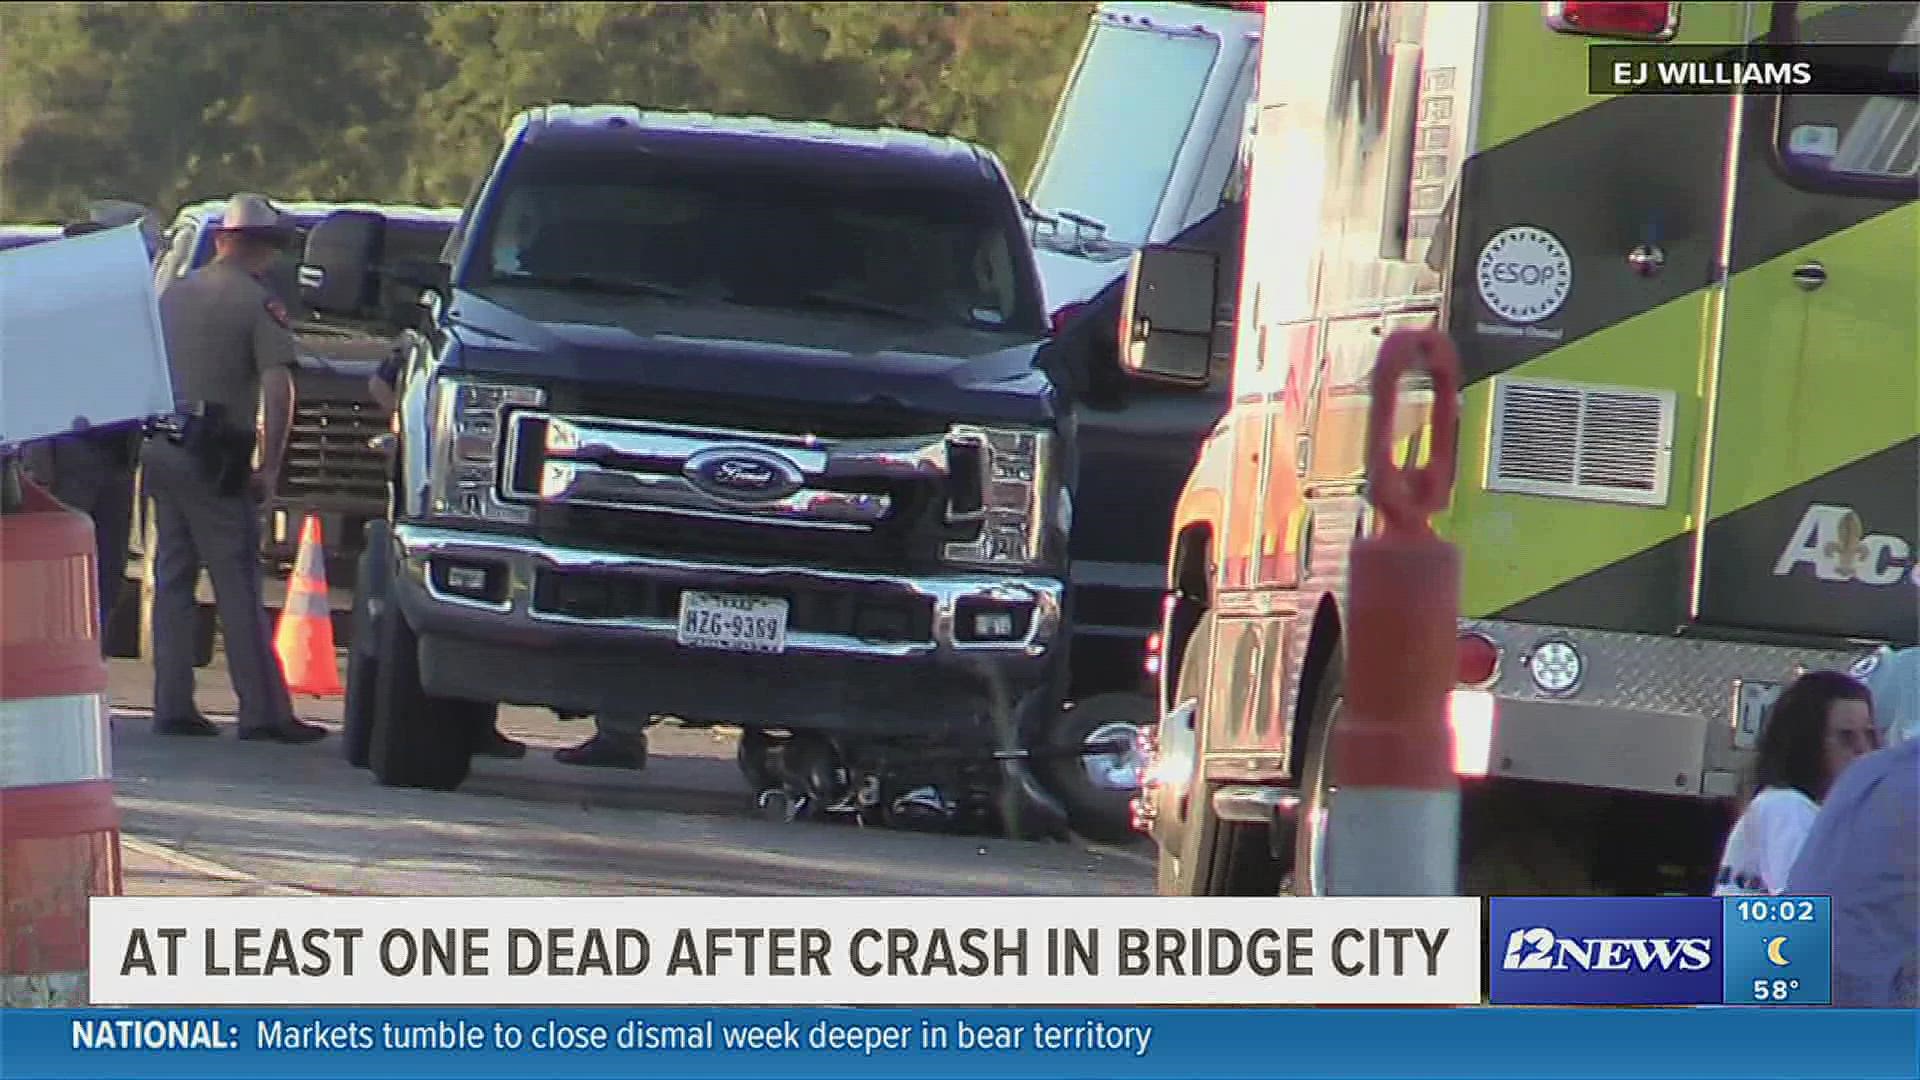 Bridge City Police are investigating after a wreck claimed the life of at least one person.